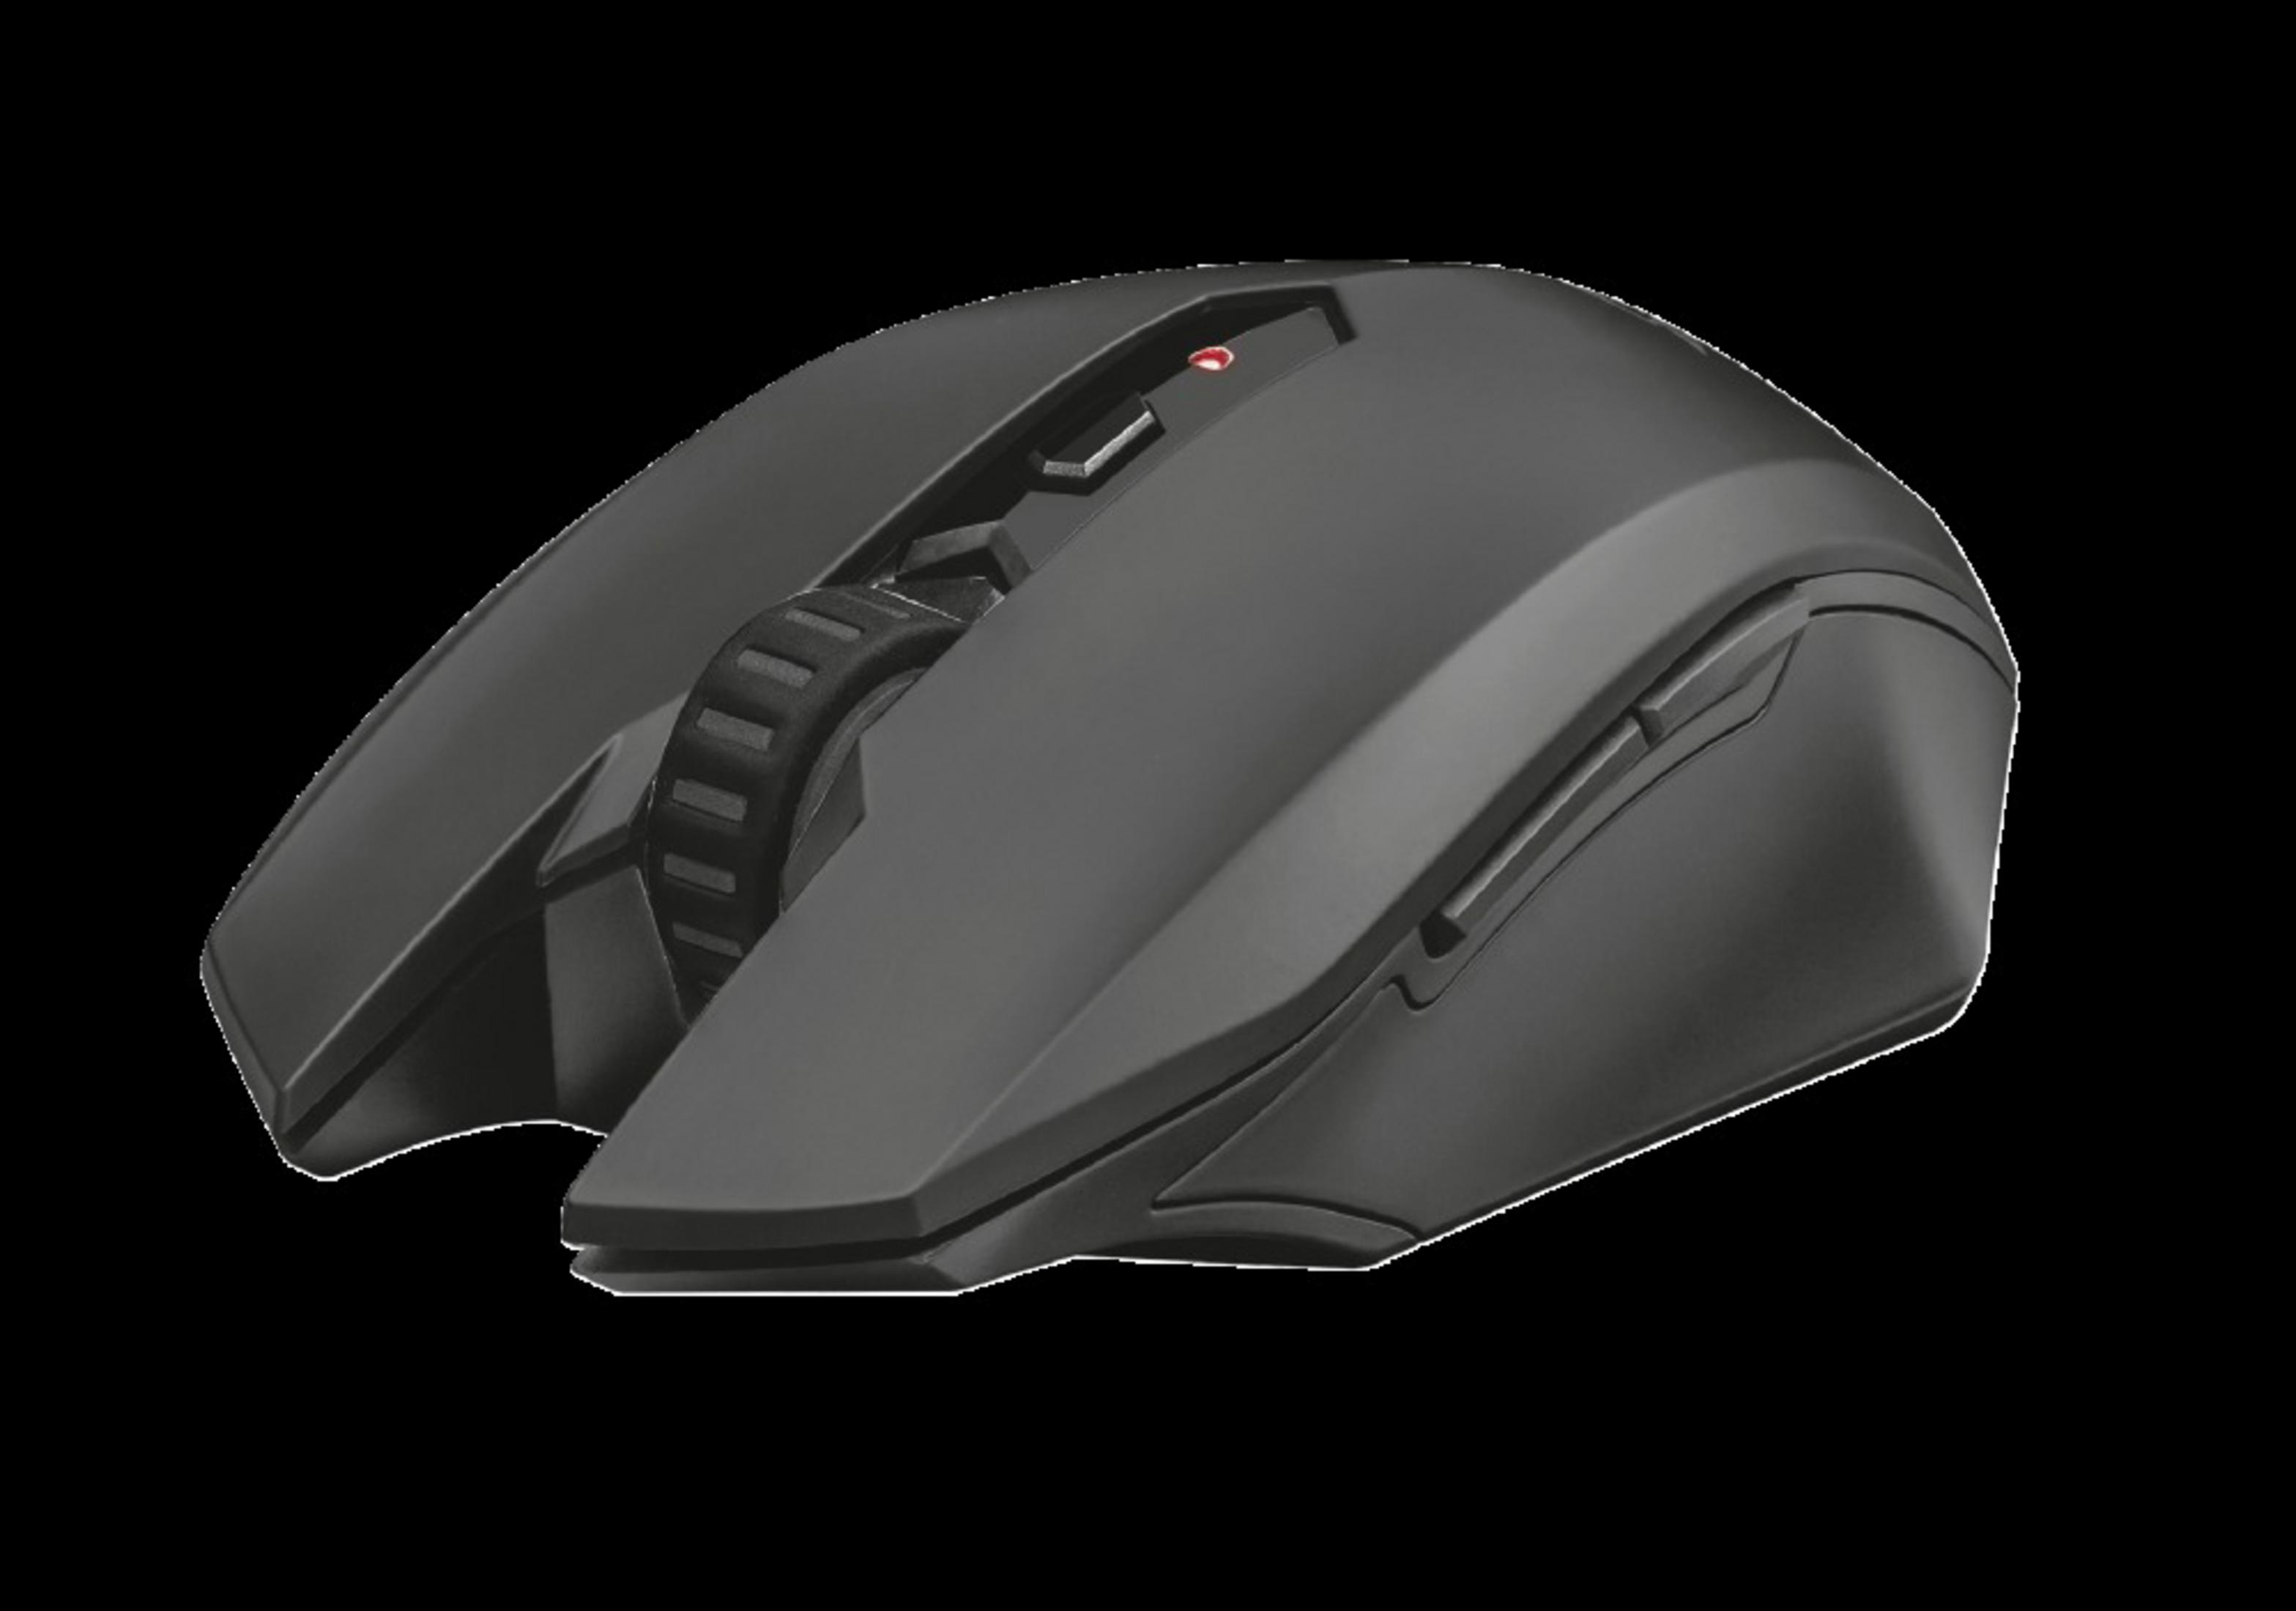 Gaming WRLS GXT Schwarz MOUSE TRUST 115 Maus, MACCI 22417 GAMING